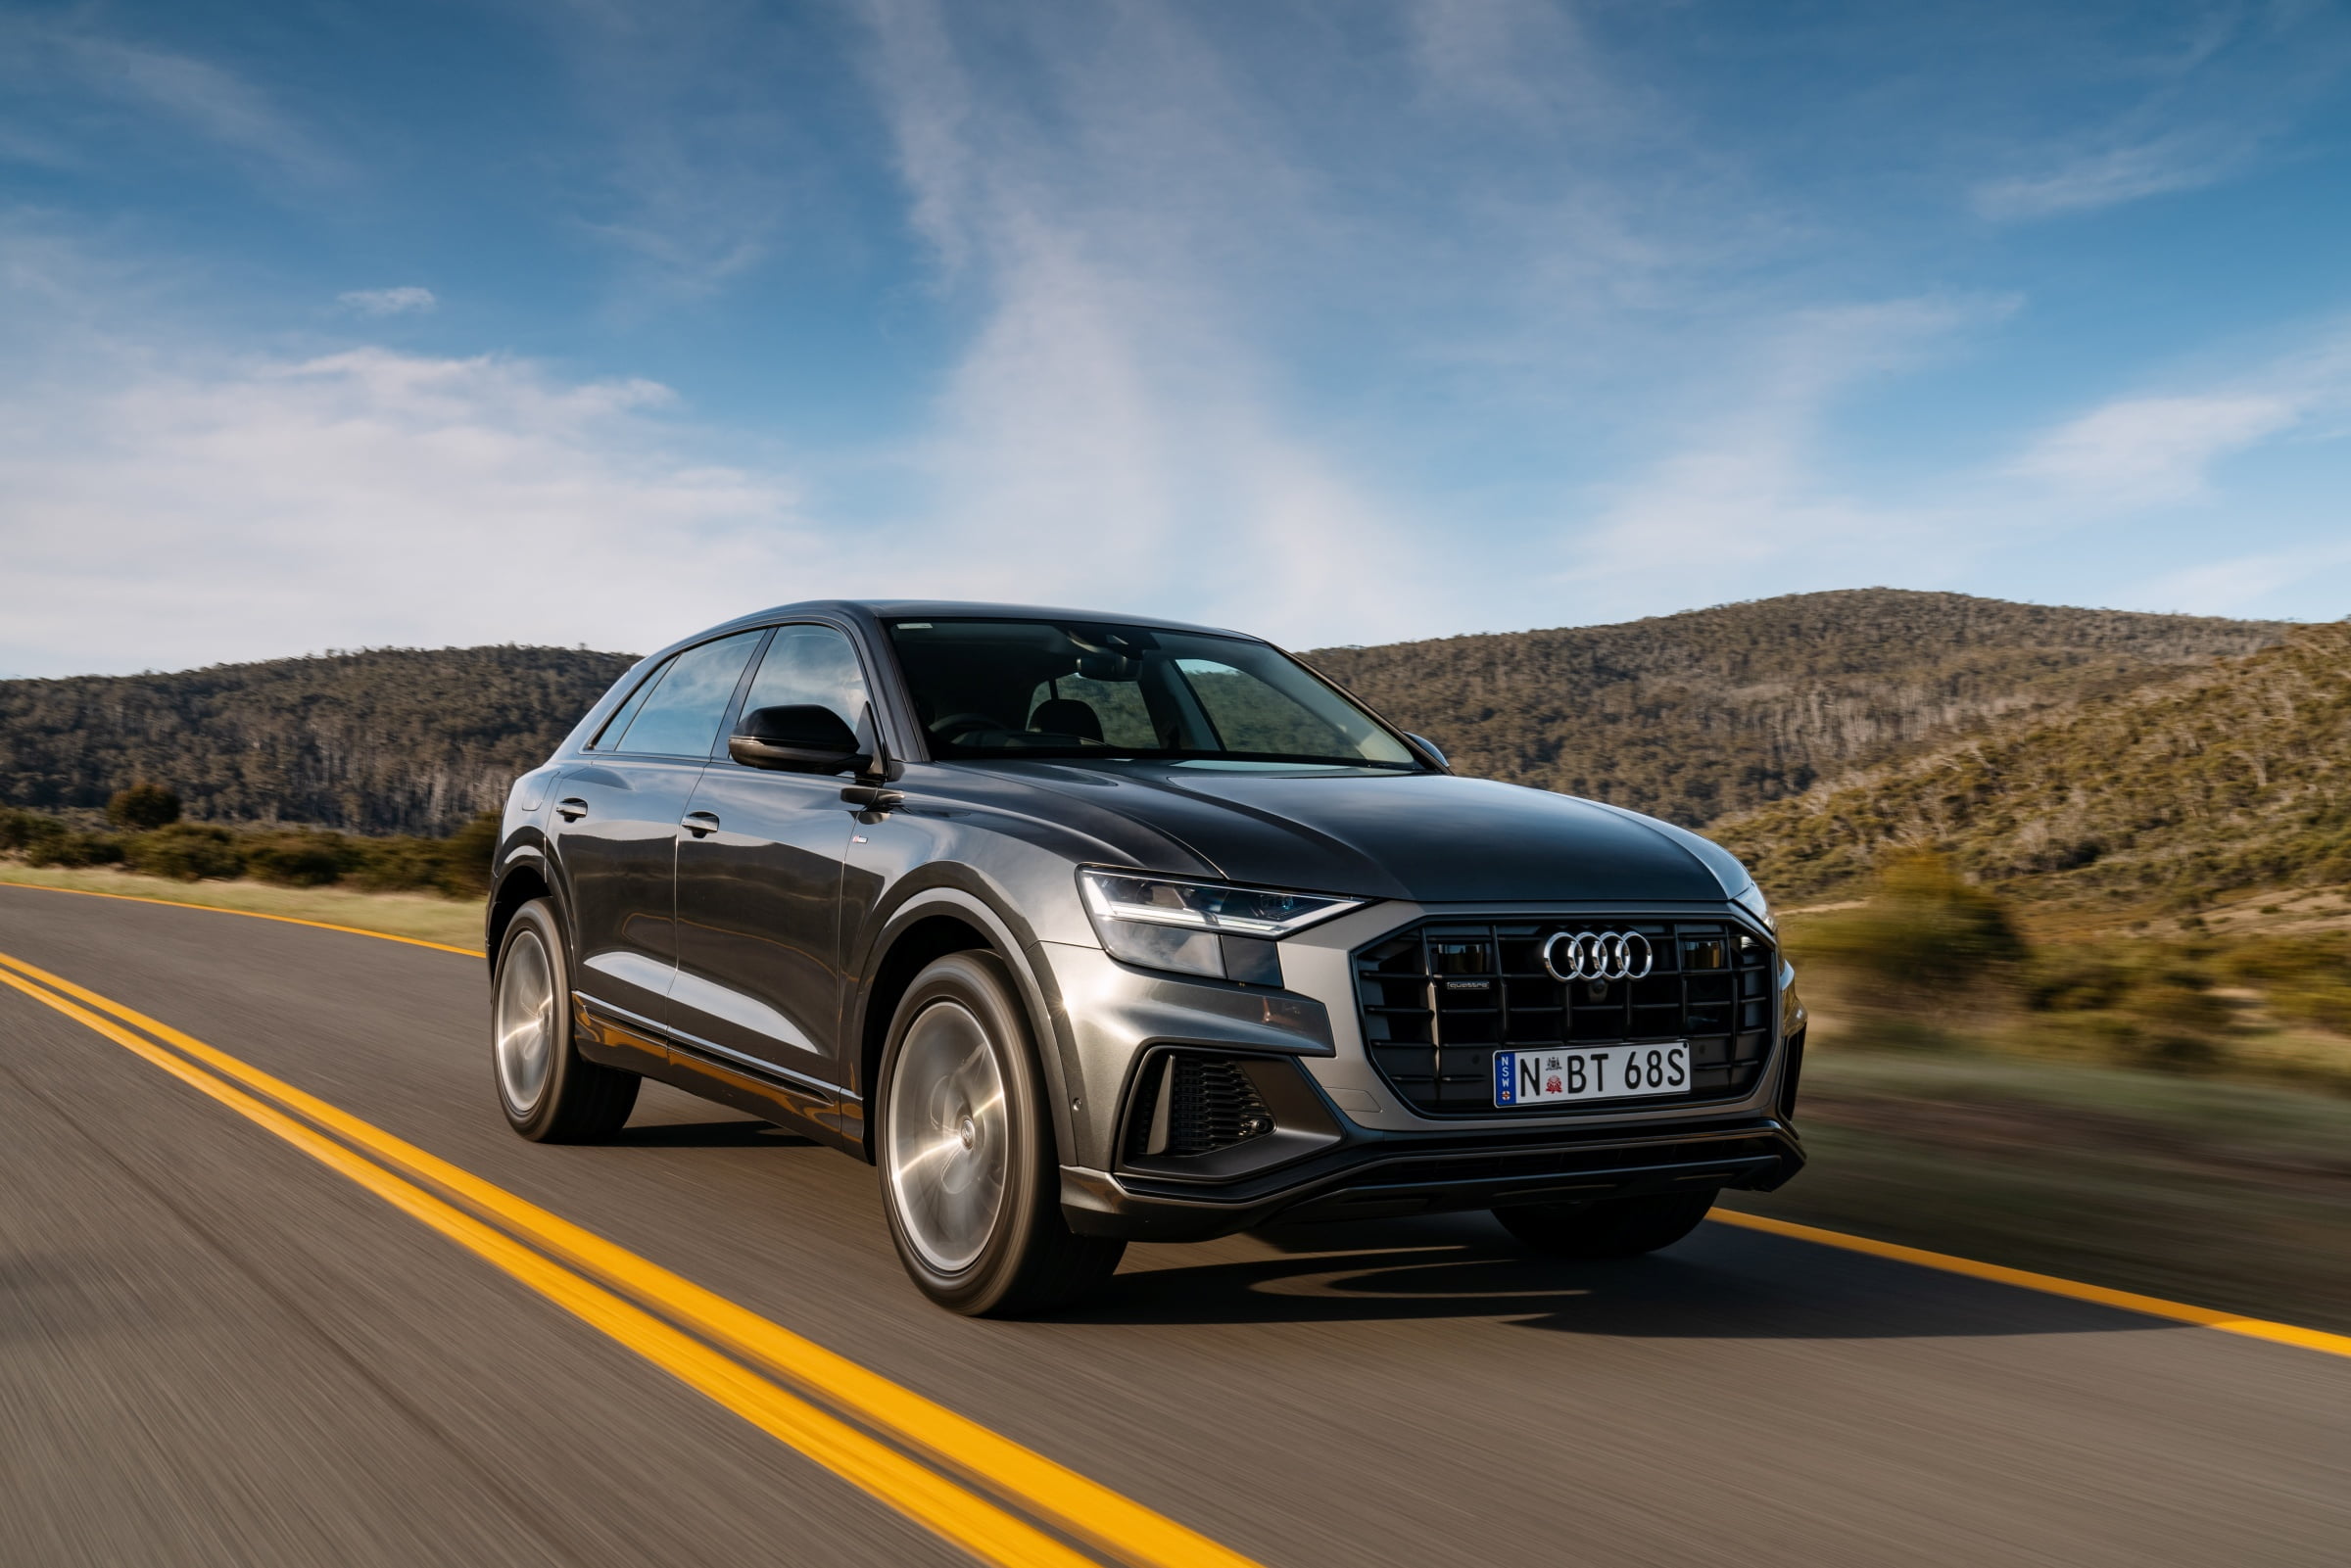 Audi Australia is bolstering its flagship luxury SUV offering with the arrival of the Audi Q8 50 TDI quattro.